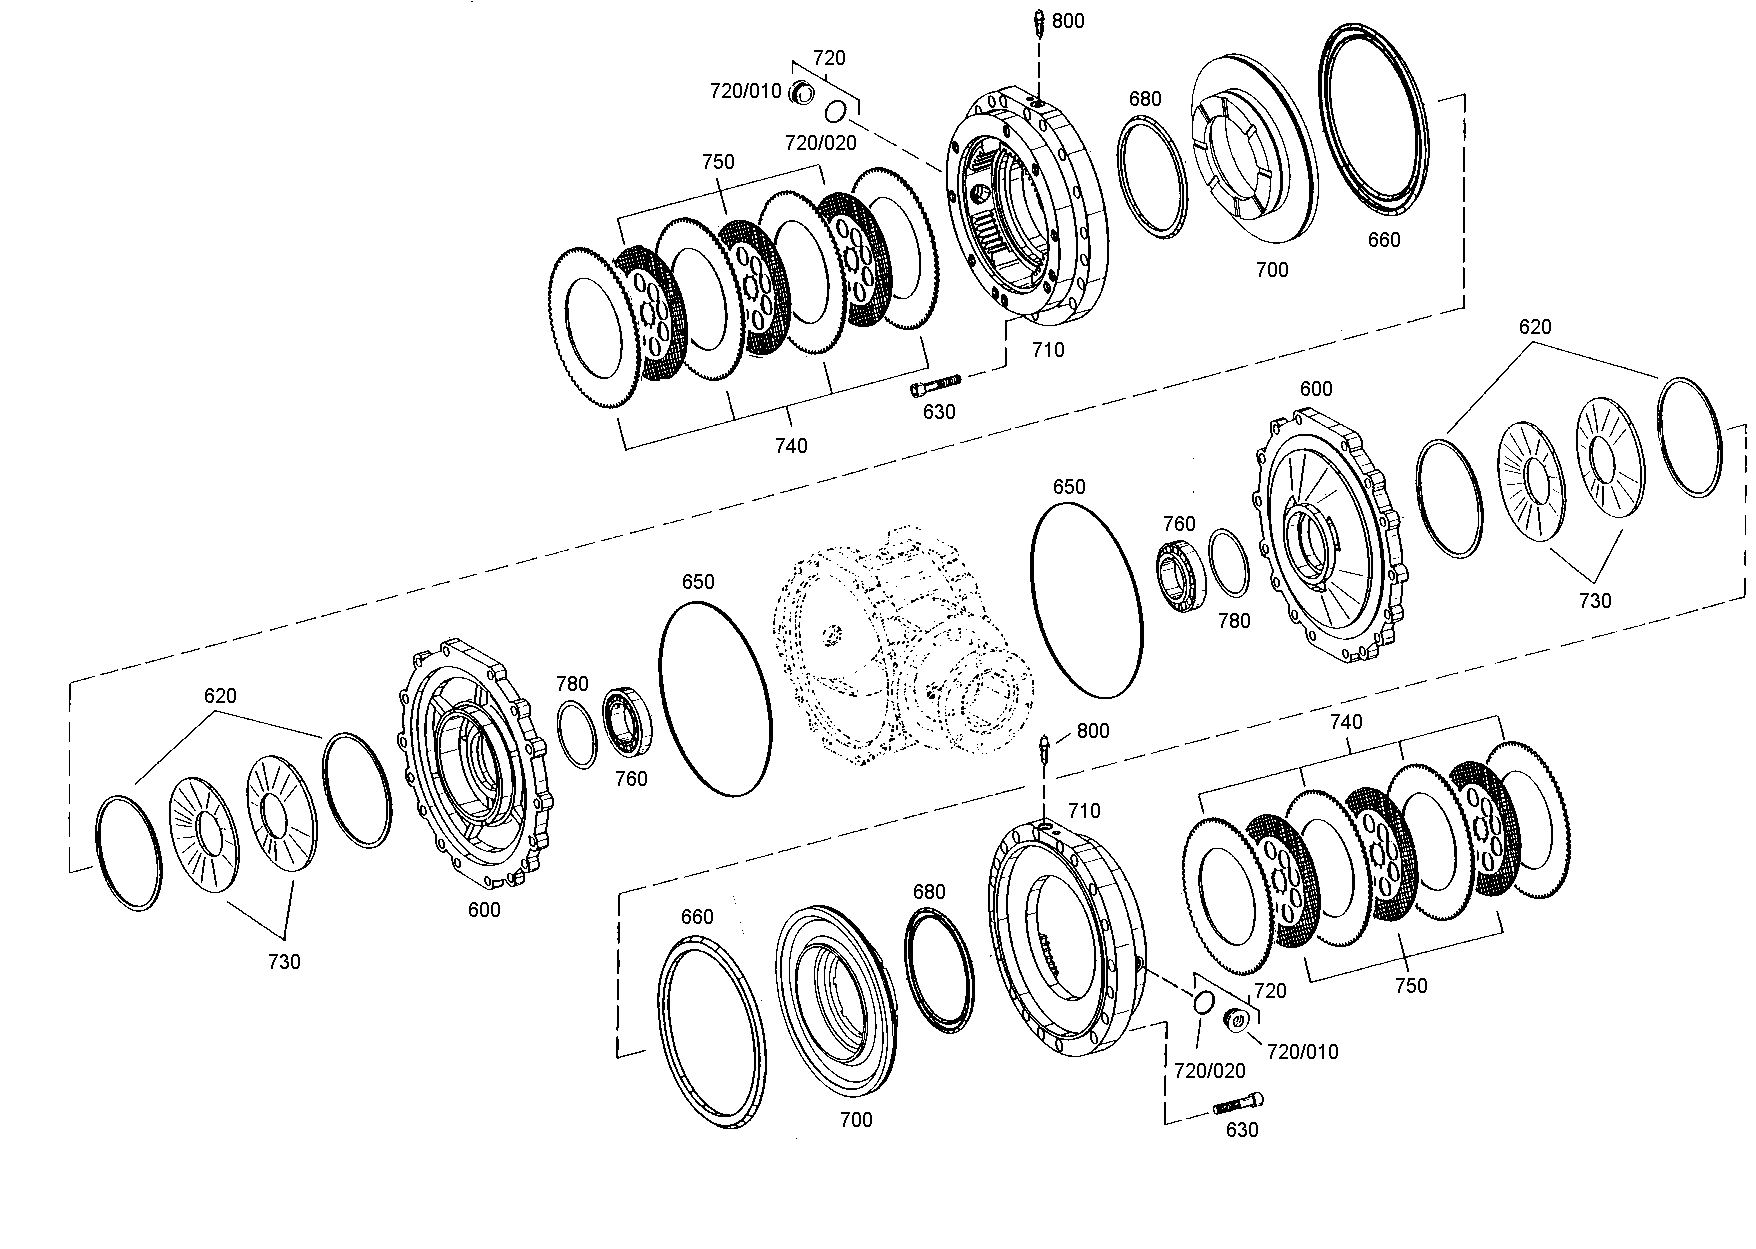 drawing for HAMM AG 1282077 - WASHER (figure 4)